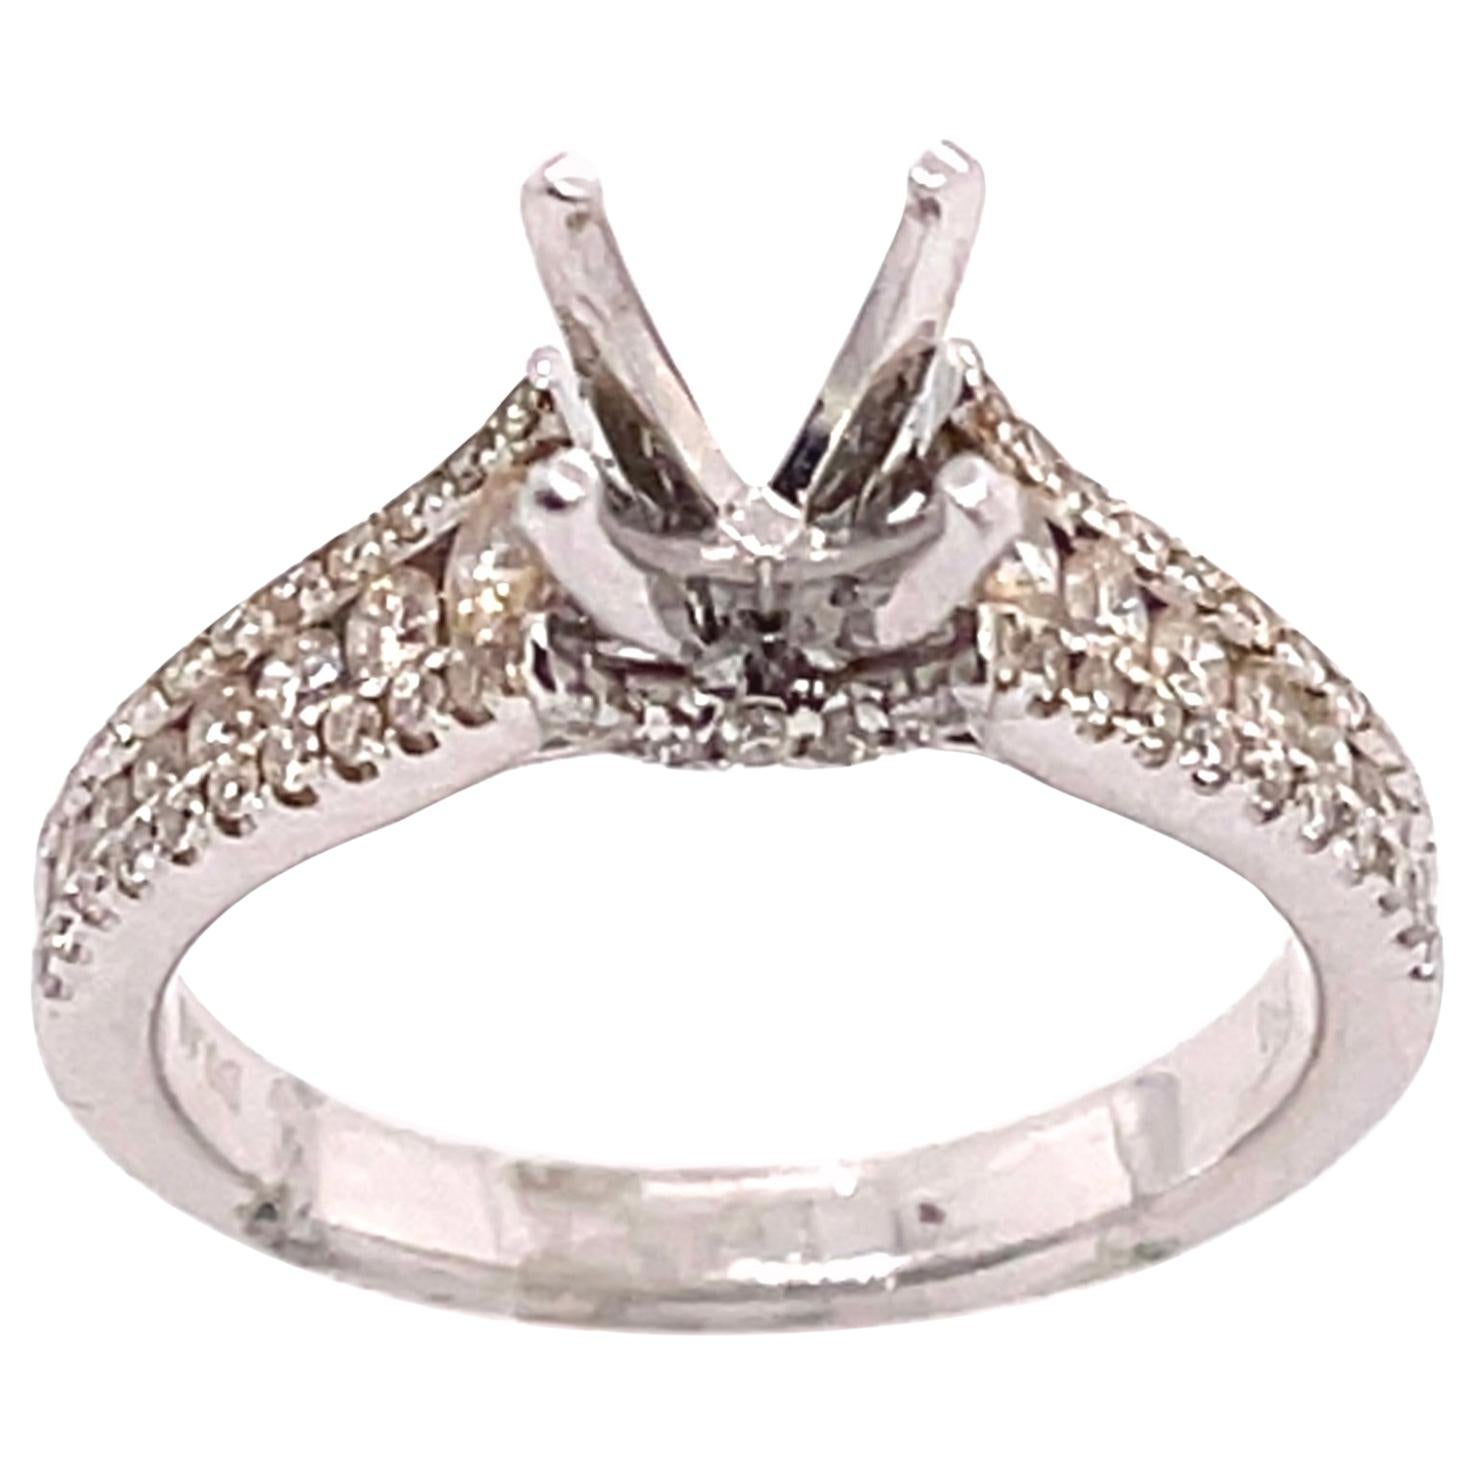 18 Karat White Gold Engagement Ring Setting with Three Tier Accent Diamond Band